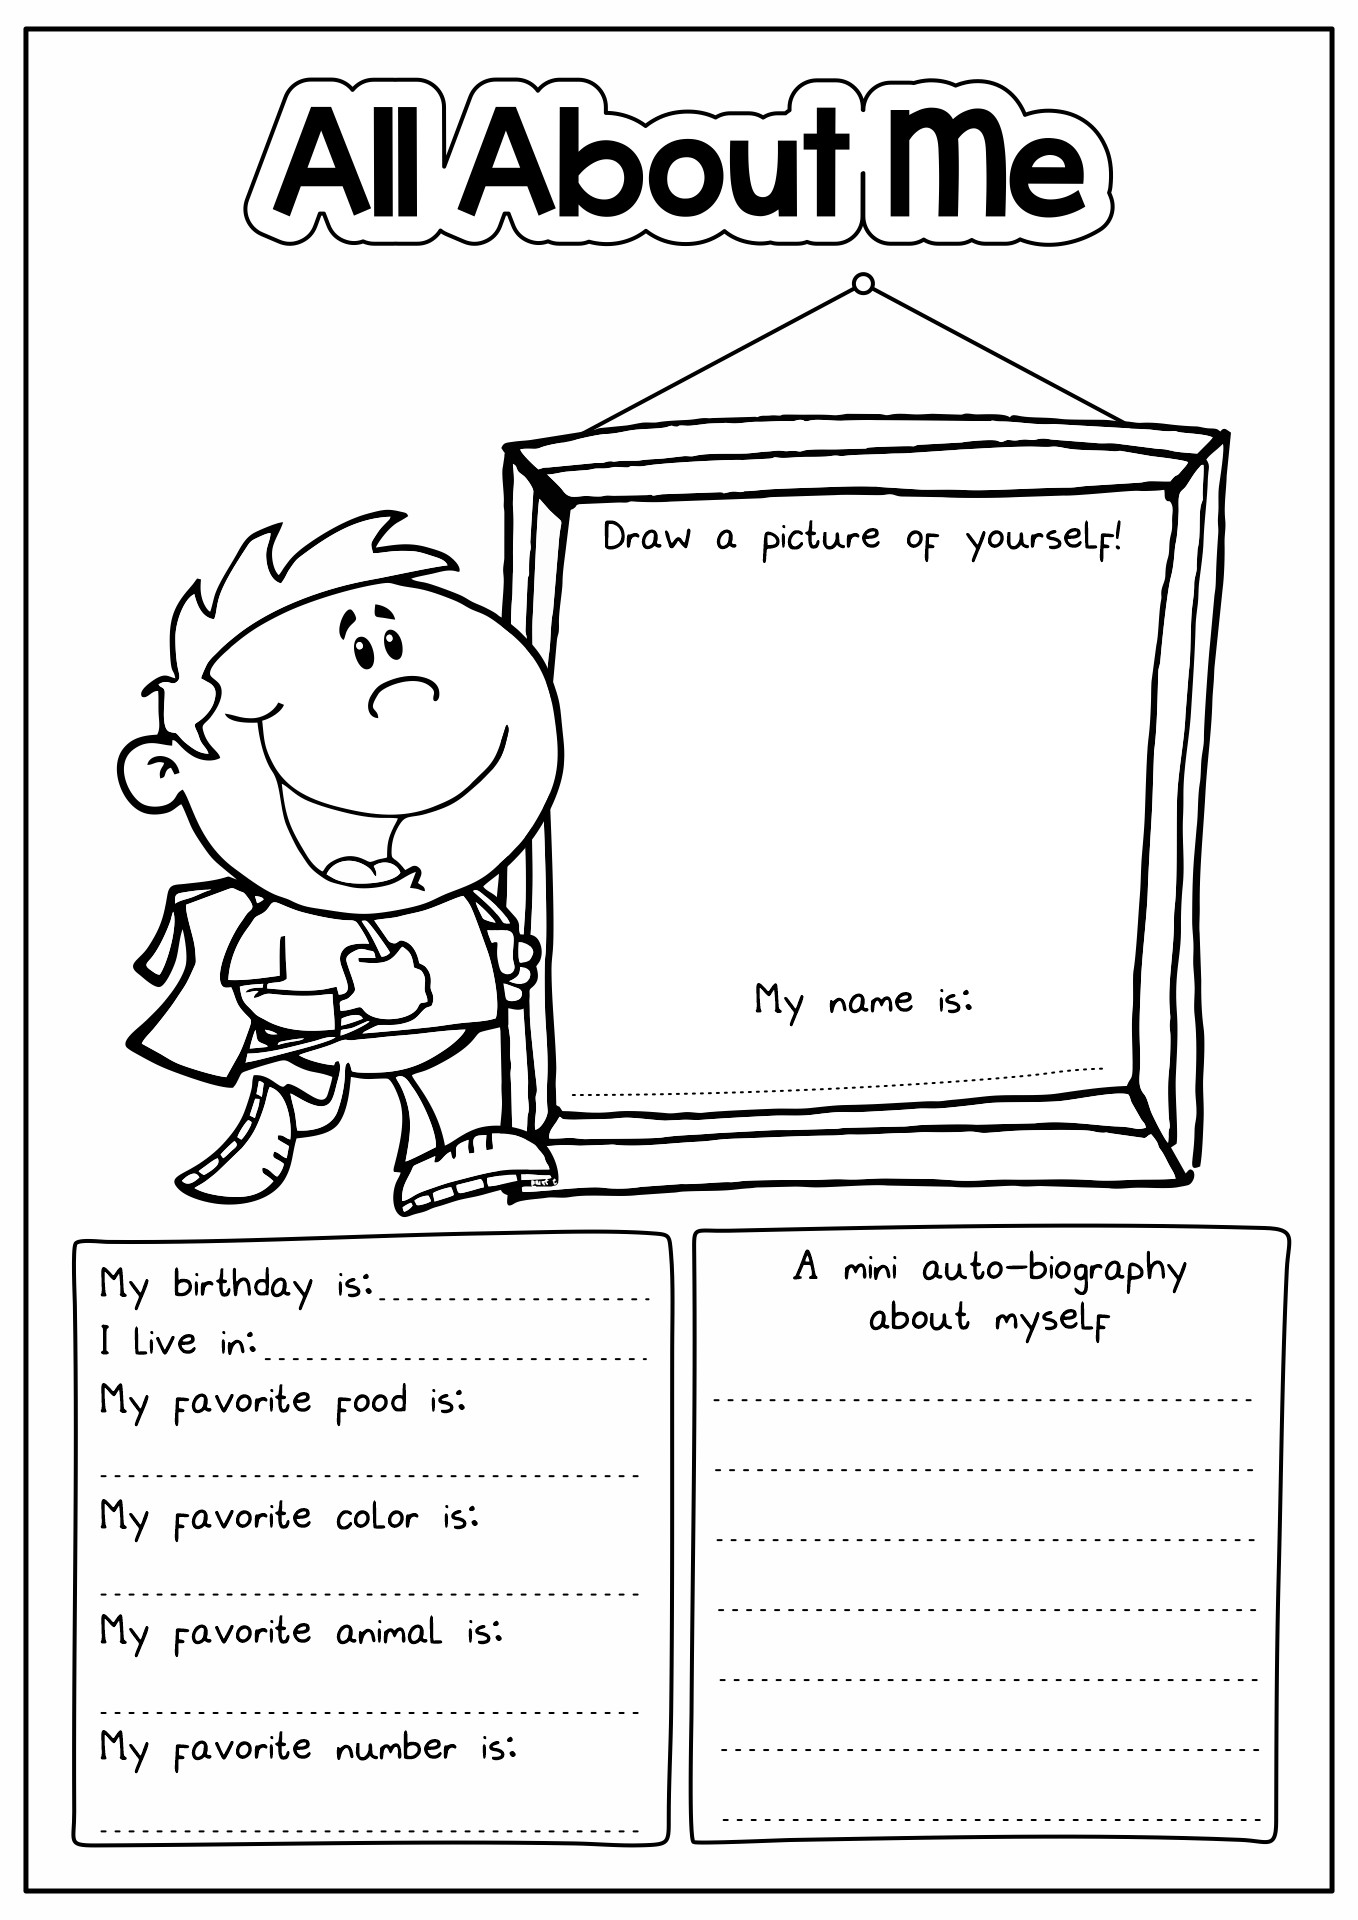 About Me Worksheet Middle School Free Printable